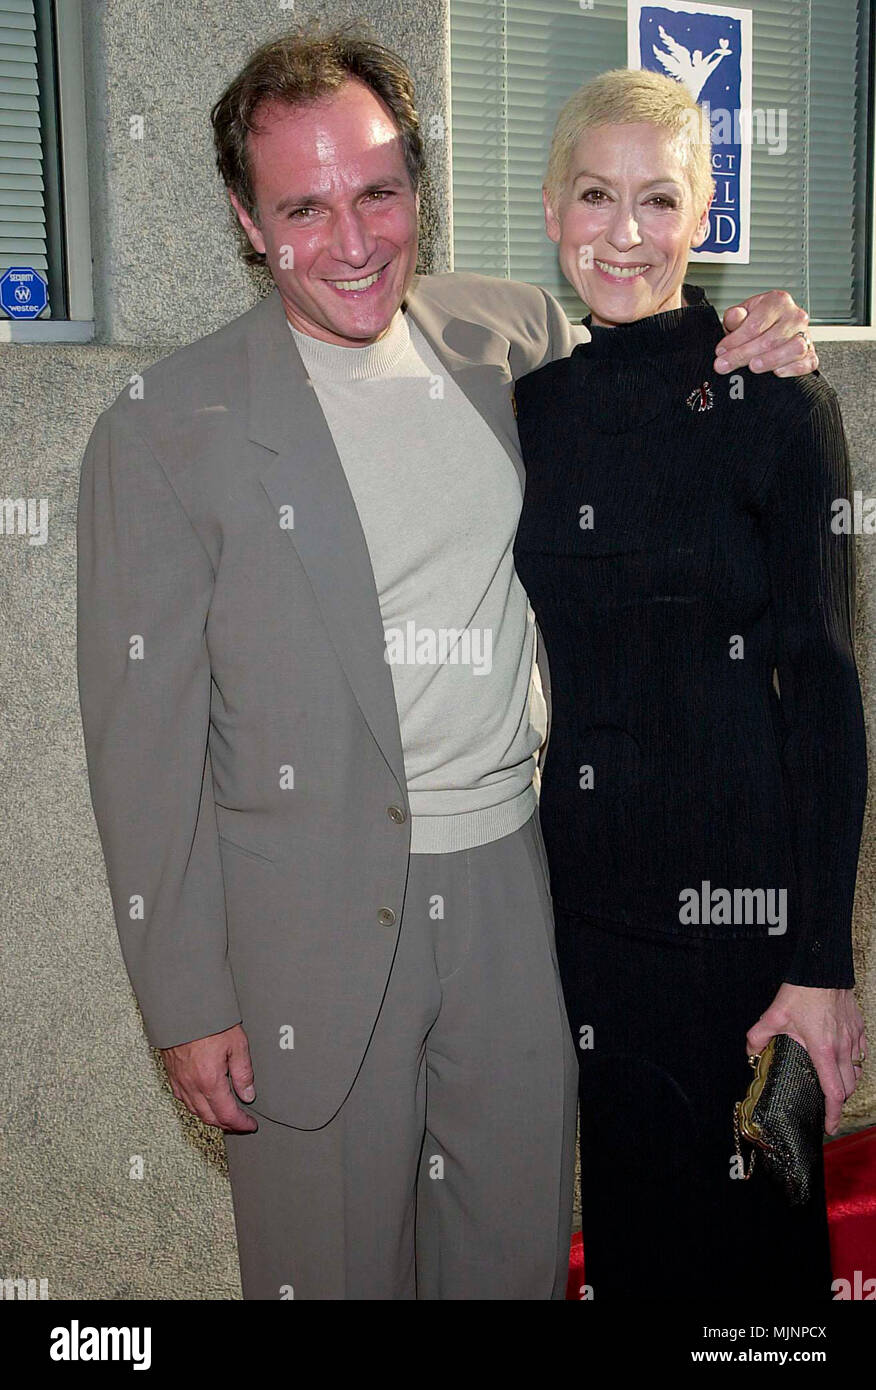 15 Jul 2000, Los Angeles, California, USA --- Robert Desiderio and Judith Light at the 6th Annual Angel Awards from Project Angel Food. 7/15/00-Los Angeles, CA --- ' Tsuni / Bourquard 'Robert Desiderio and Judith Light Robert Desiderio and Judith Light Robert Desiderio and Judith Light Event in Hollywood Life - California,  Red Carpet Event, Vertical, USA, Film Industry, Celebrities,  Photography, Bestof, Arts Culture and Entertainment, Topix  Celebrities fashion /  from the Red Carpet-1994-2000, one person, Vertical, Best of, Hollywood Life, Event in Hollywood Life - California,  Red Carpet a Stock Photo